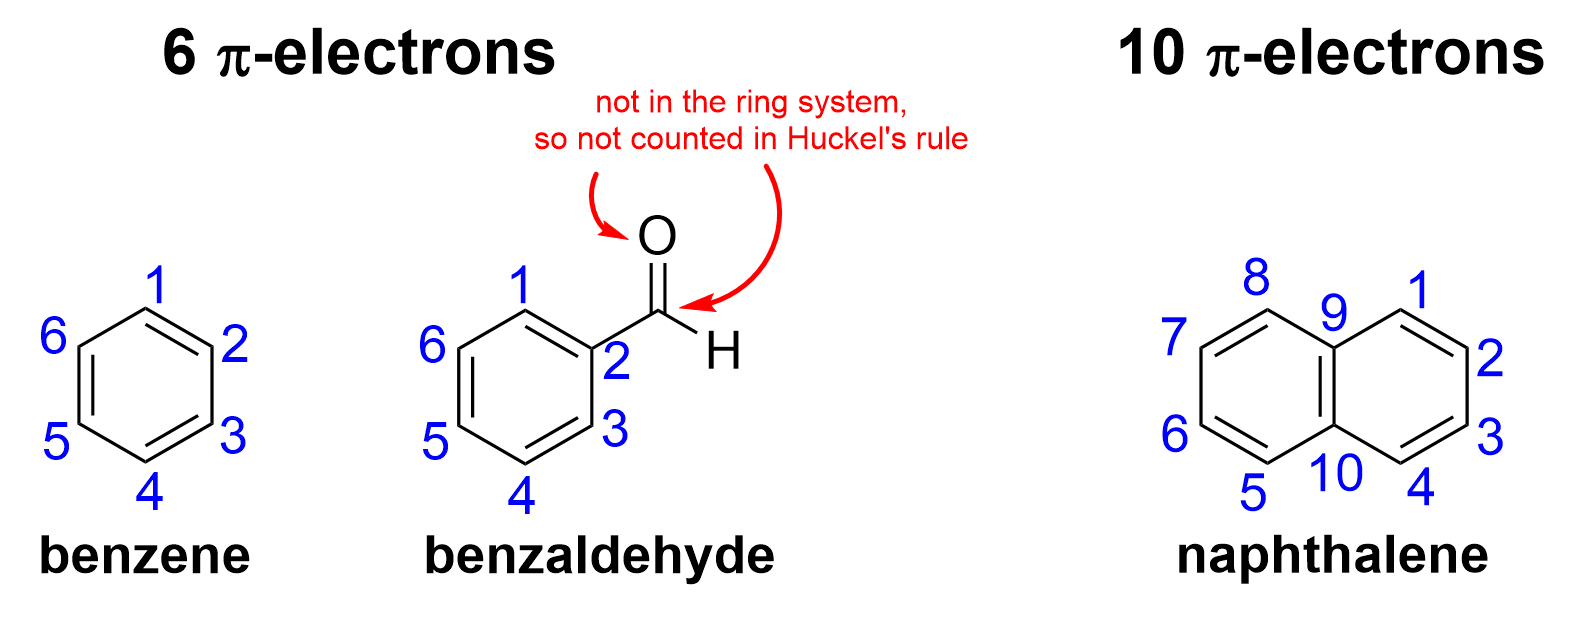 Three line-bond drawings of benzene, benzaldehyde, and naphthalene. The carbon atoms in each aromatic ring are numbered 1 to 6 for benzene and benzaldehyde, and 1 to 10 for naphthalene. For benzaldehyde, the carbonyl group that is outside the ring has a double bond that is not in the ring system and not counted in Huckel’s rule.